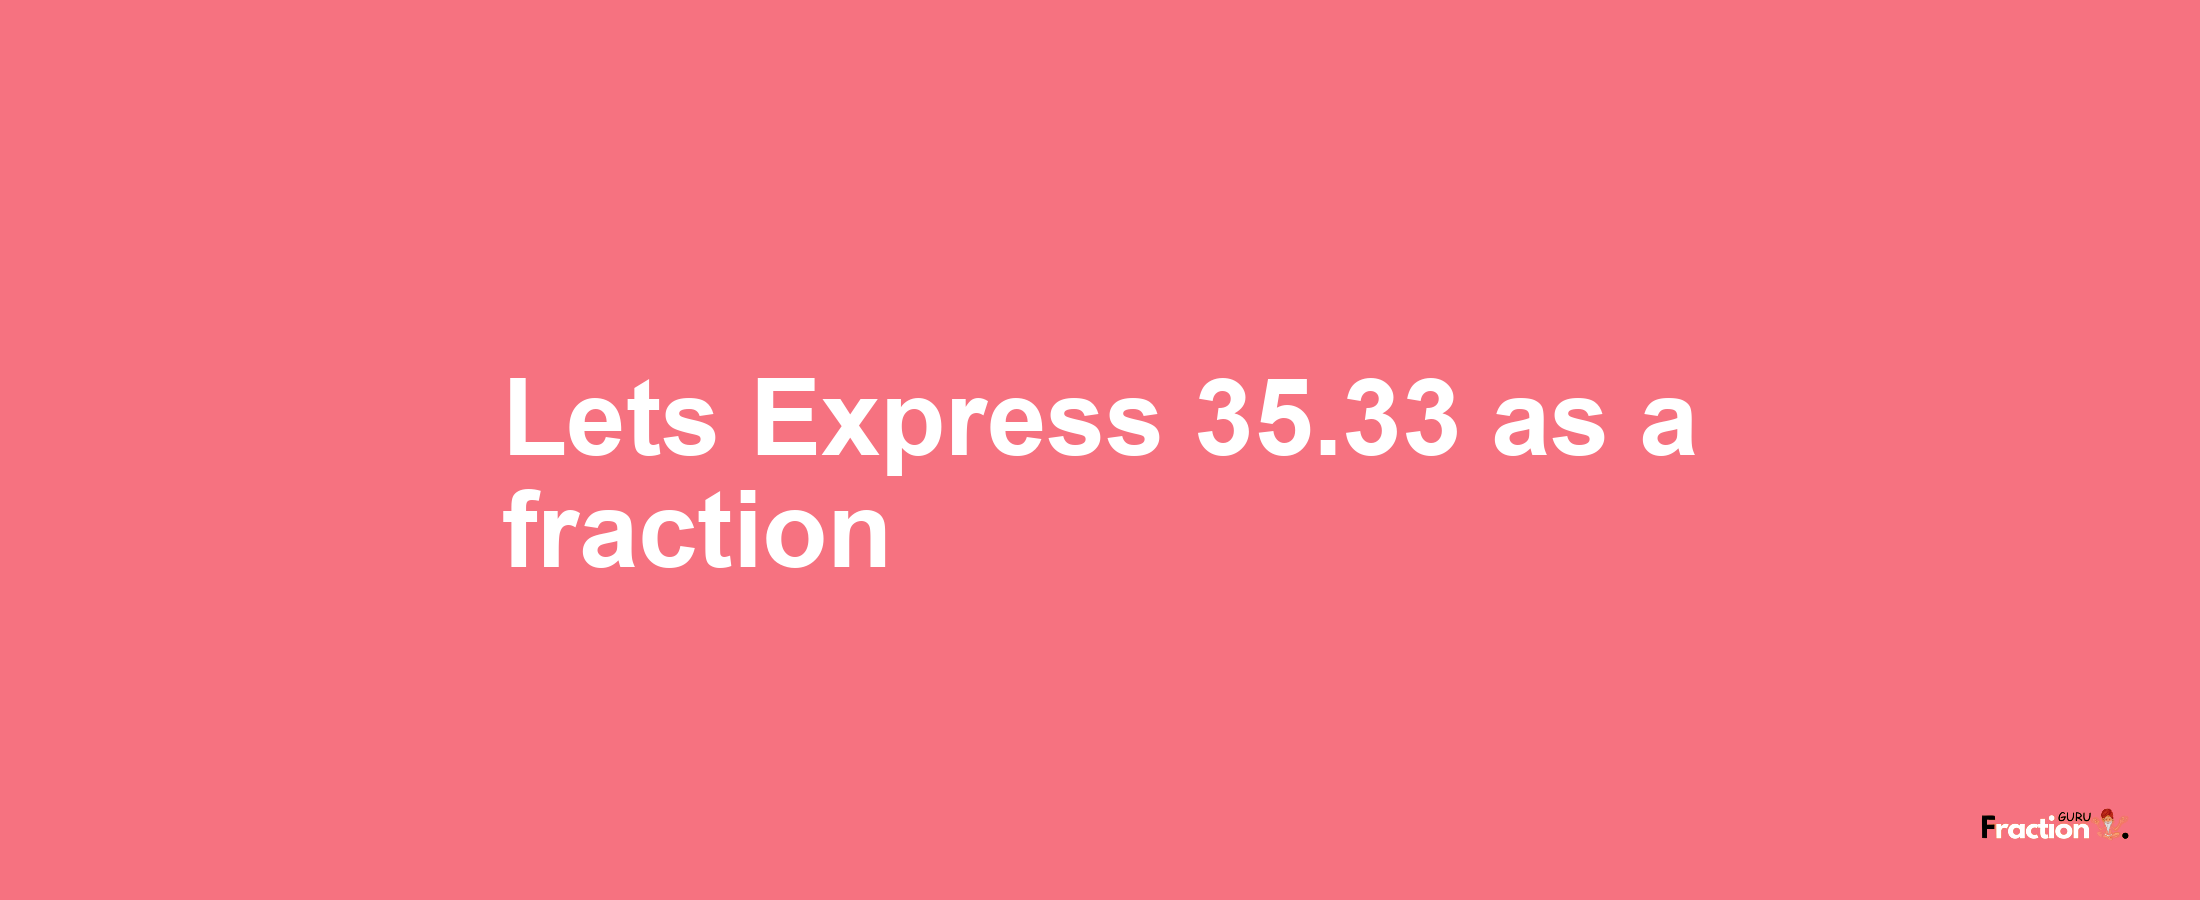 Lets Express 35.33 as afraction